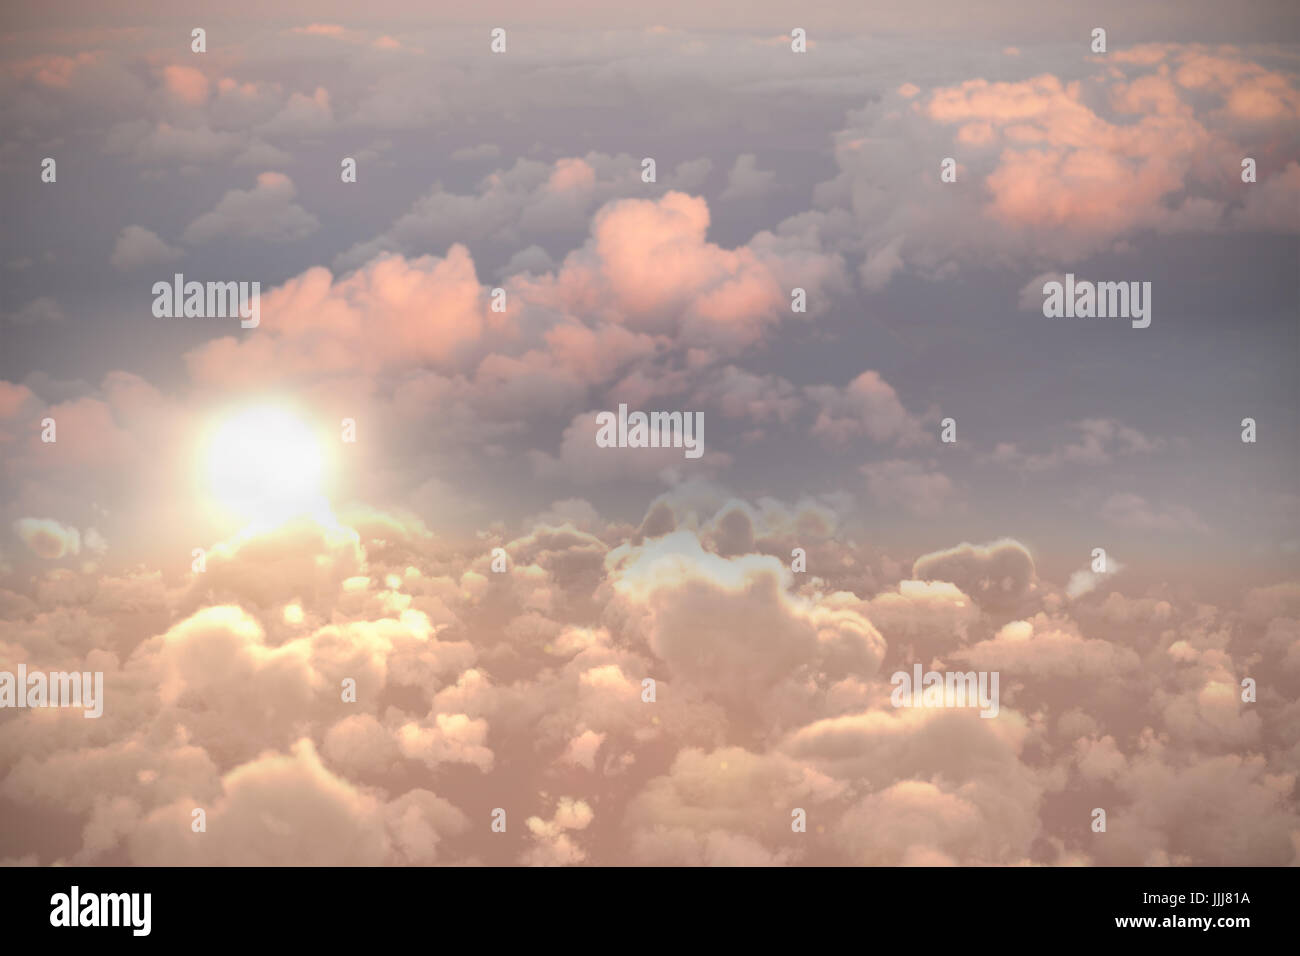 Full frame image of cloudy sky Stock Photo